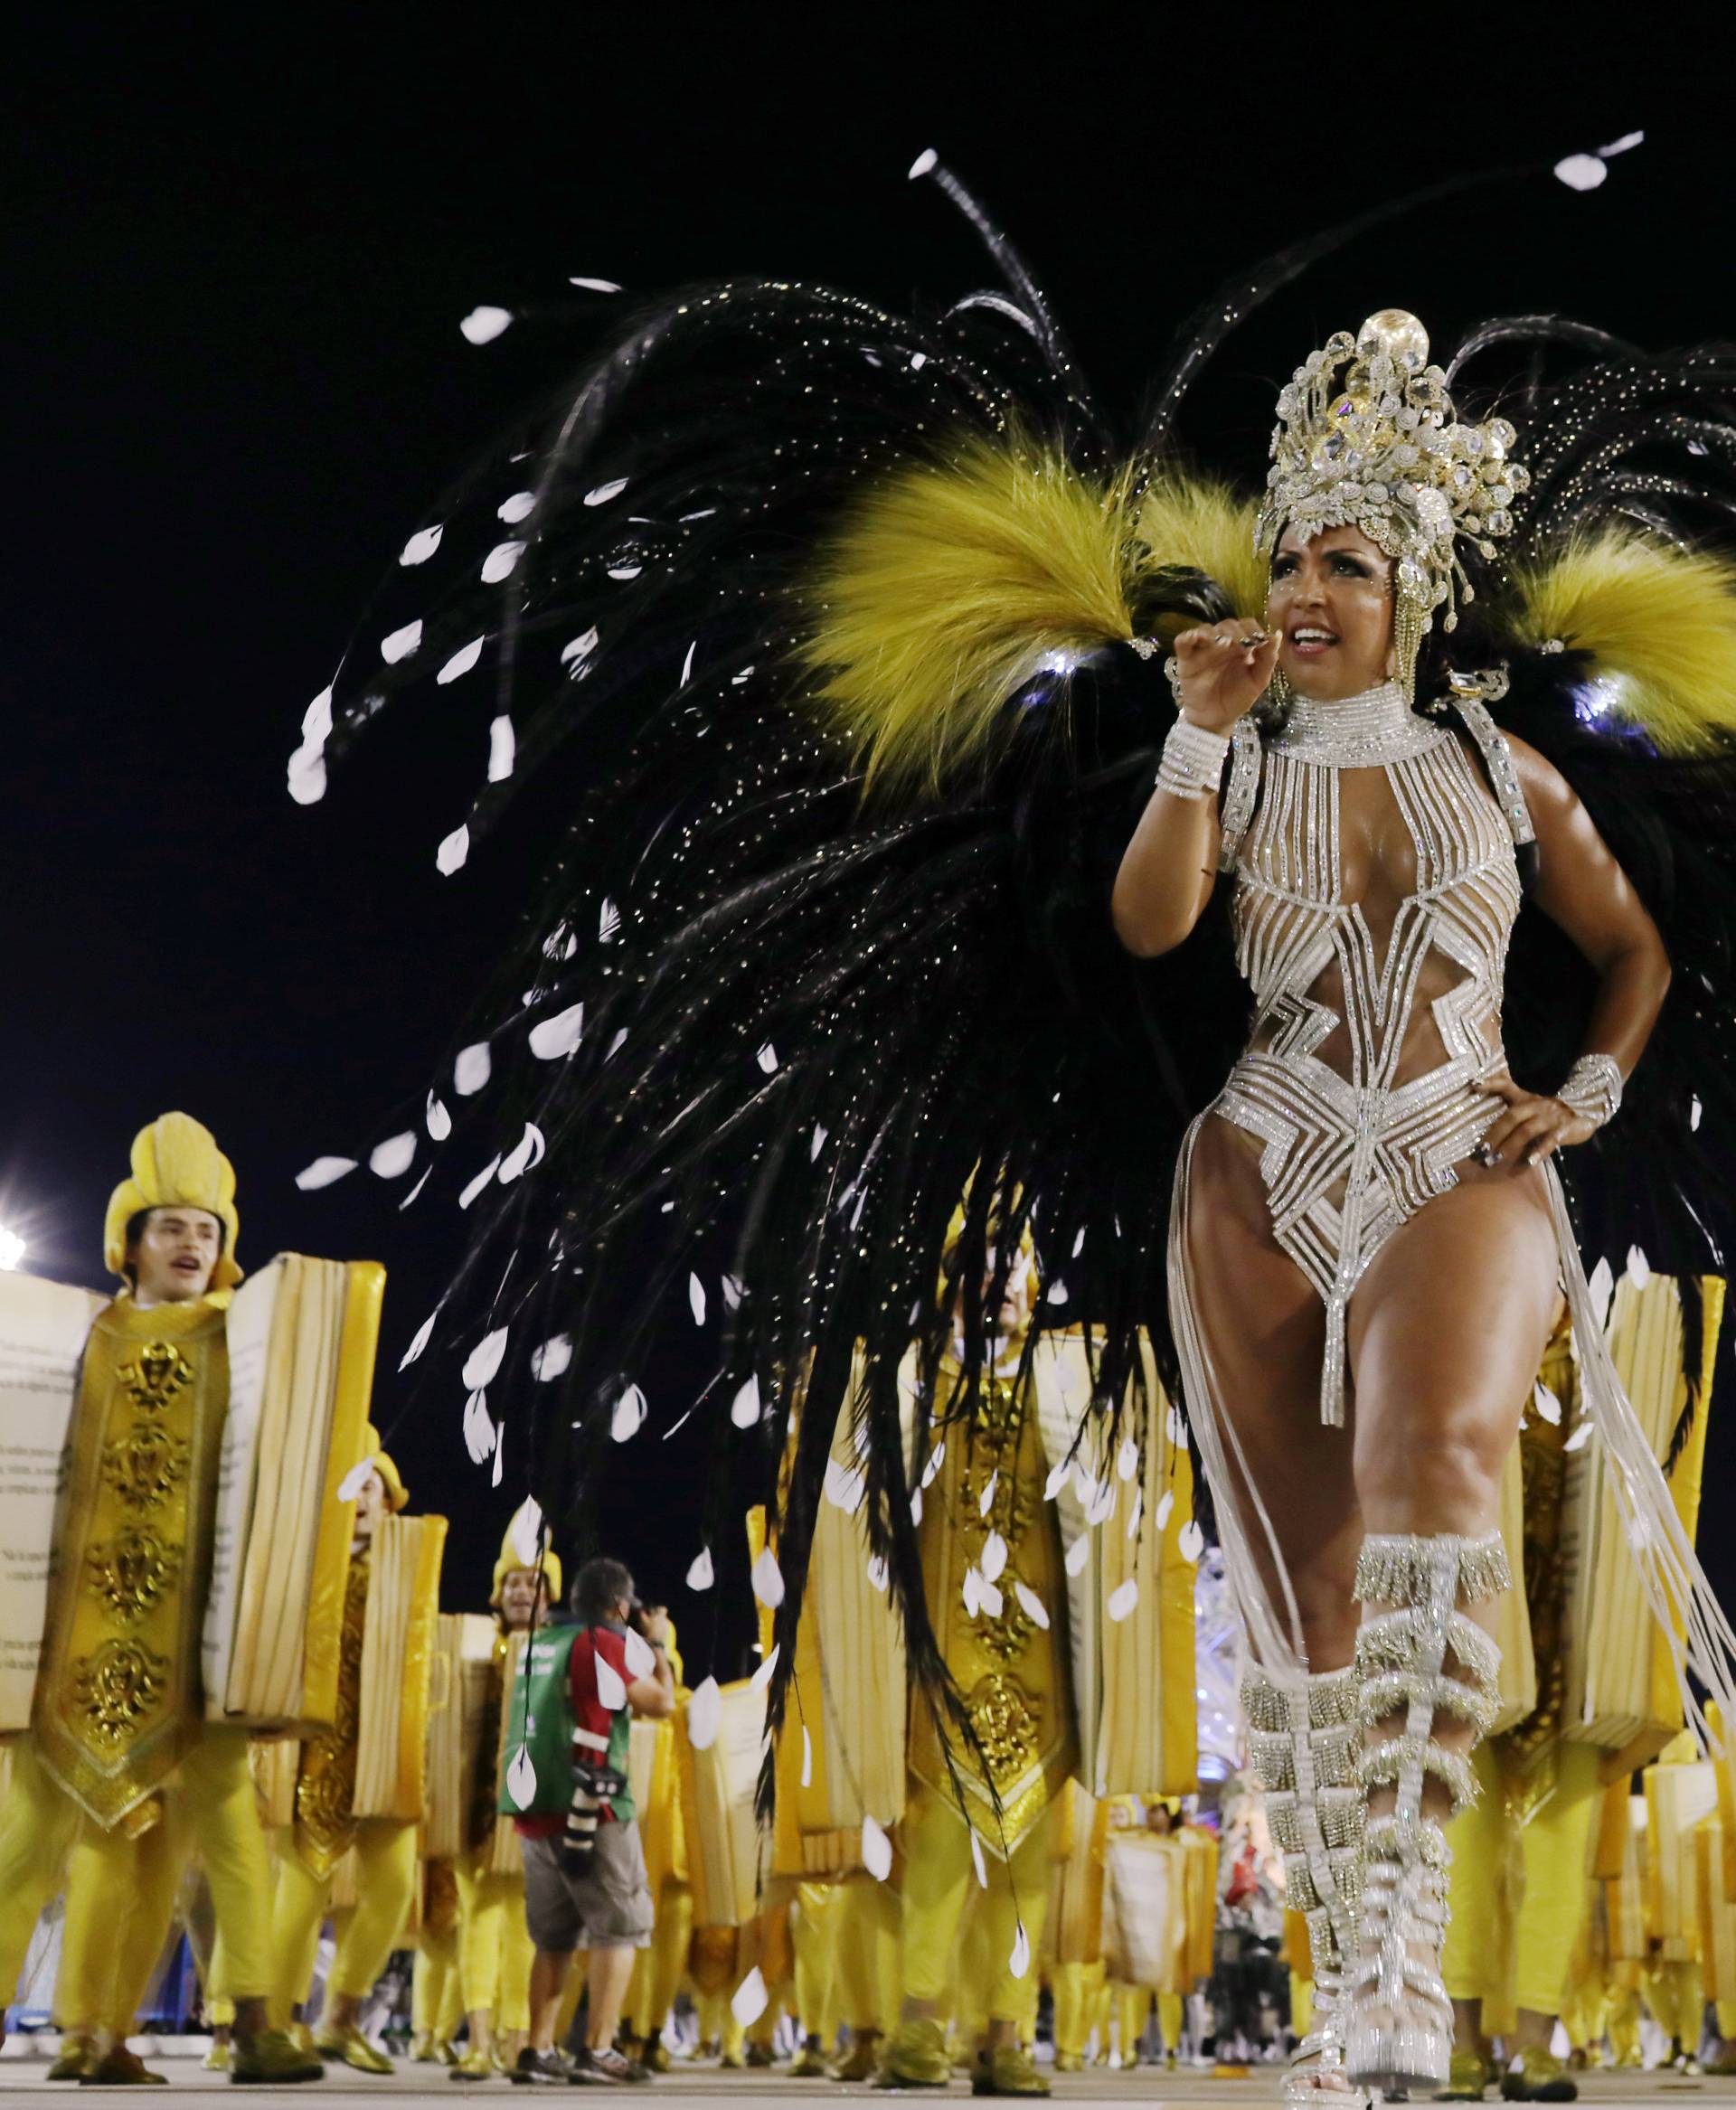 Revellers from Unidos da Tijuca Samba school perform during the second night of the Carnival parade at the Sambadrome in Rio de Janeiro